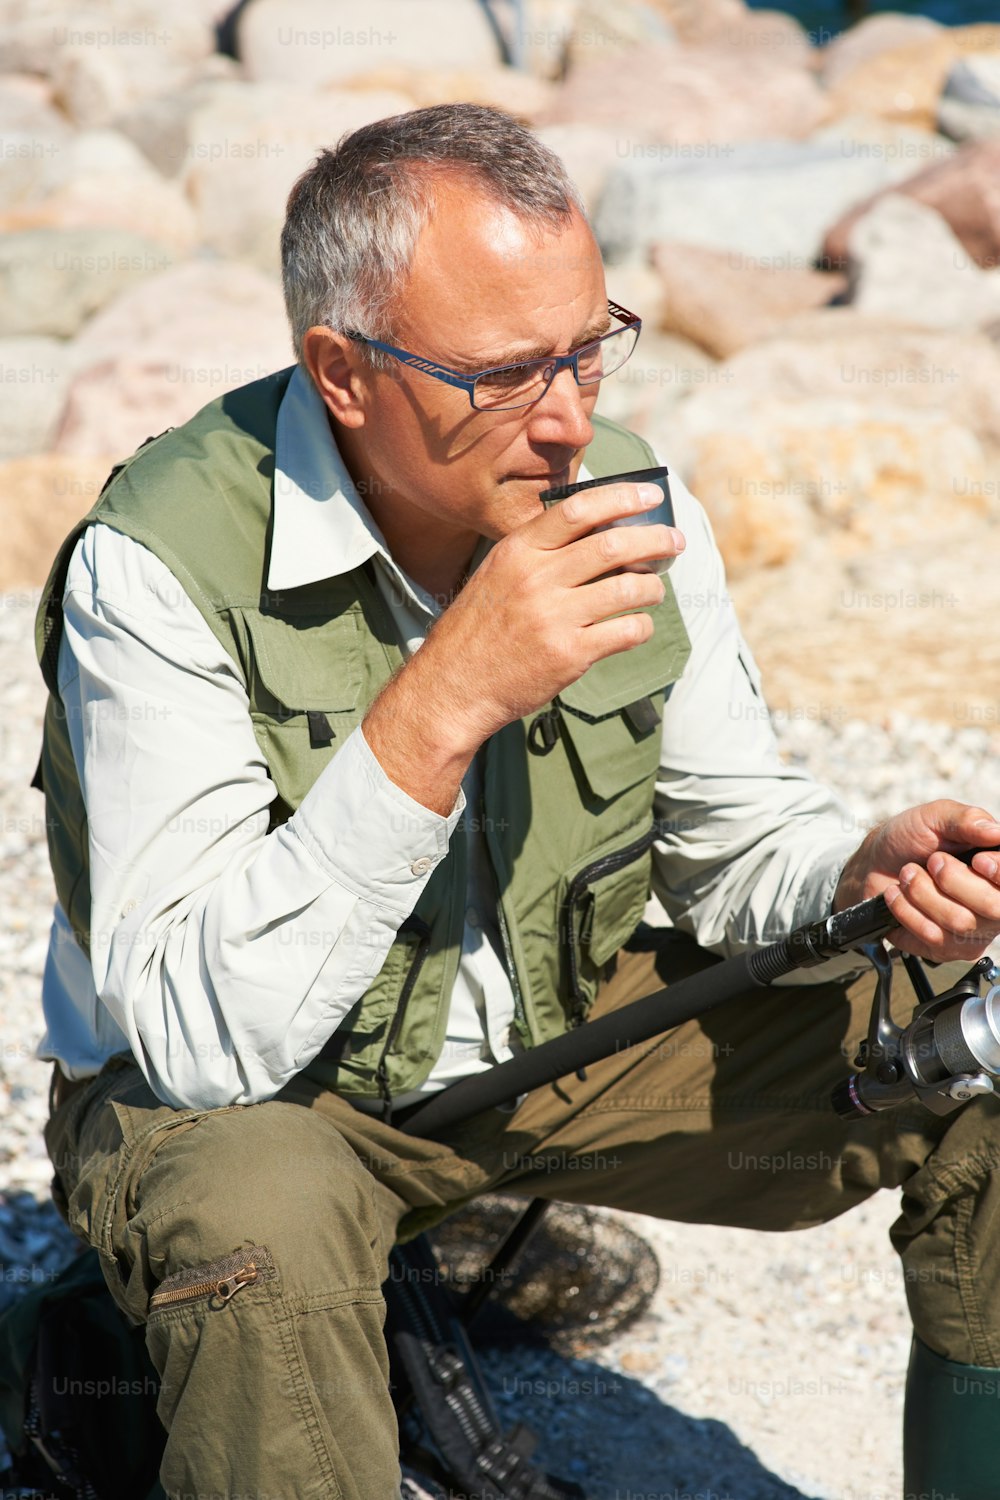 a man sitting on the ground holding a camera